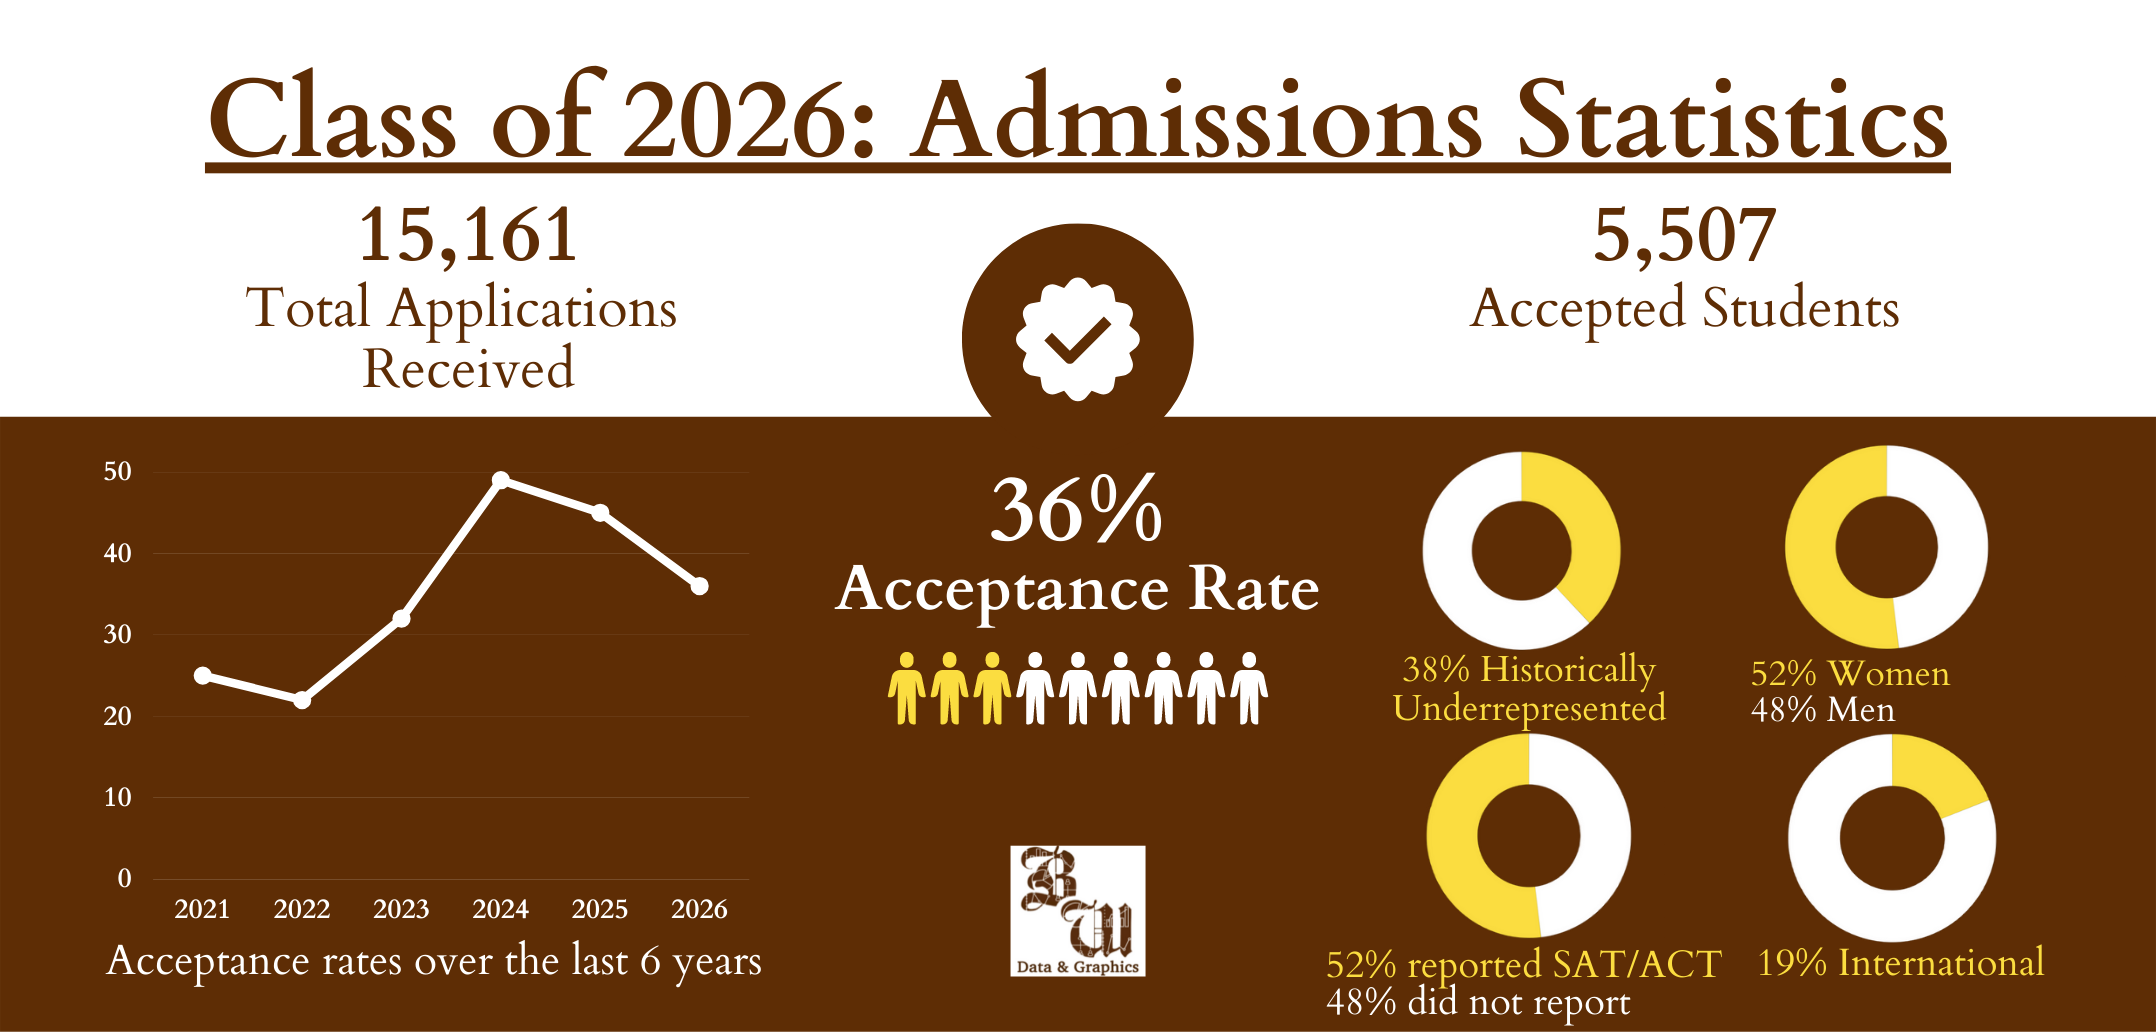 acceptance-rate-decreases-for-class-of-2026-the-brown-and-white